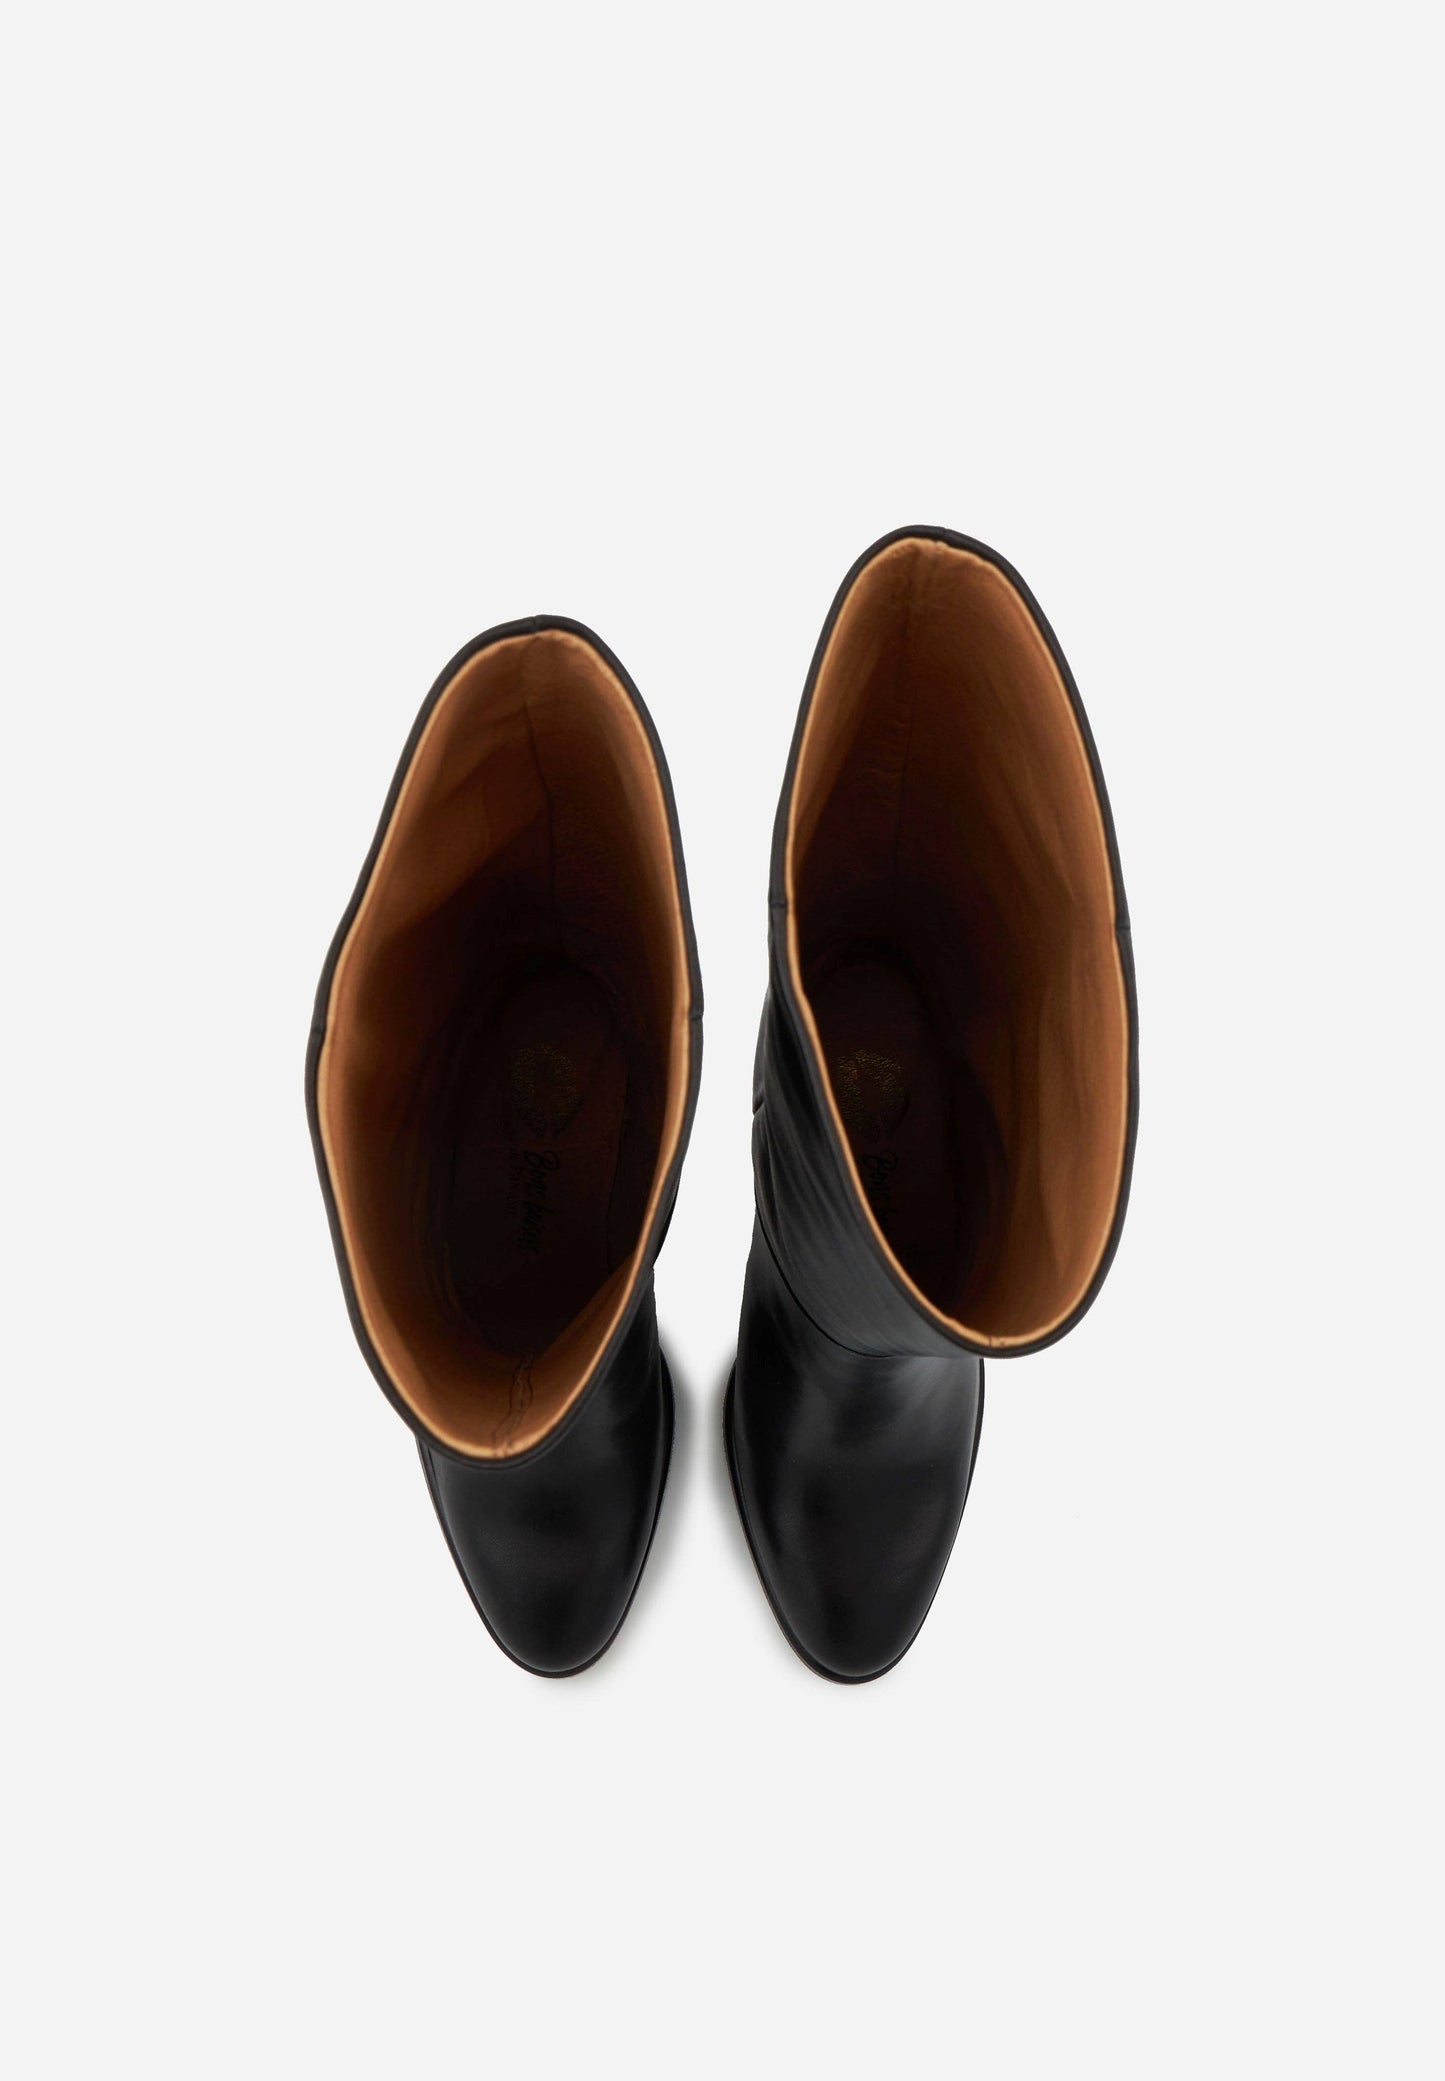 Bons Baisers Paris - Adele Smooth Black Leather Boots